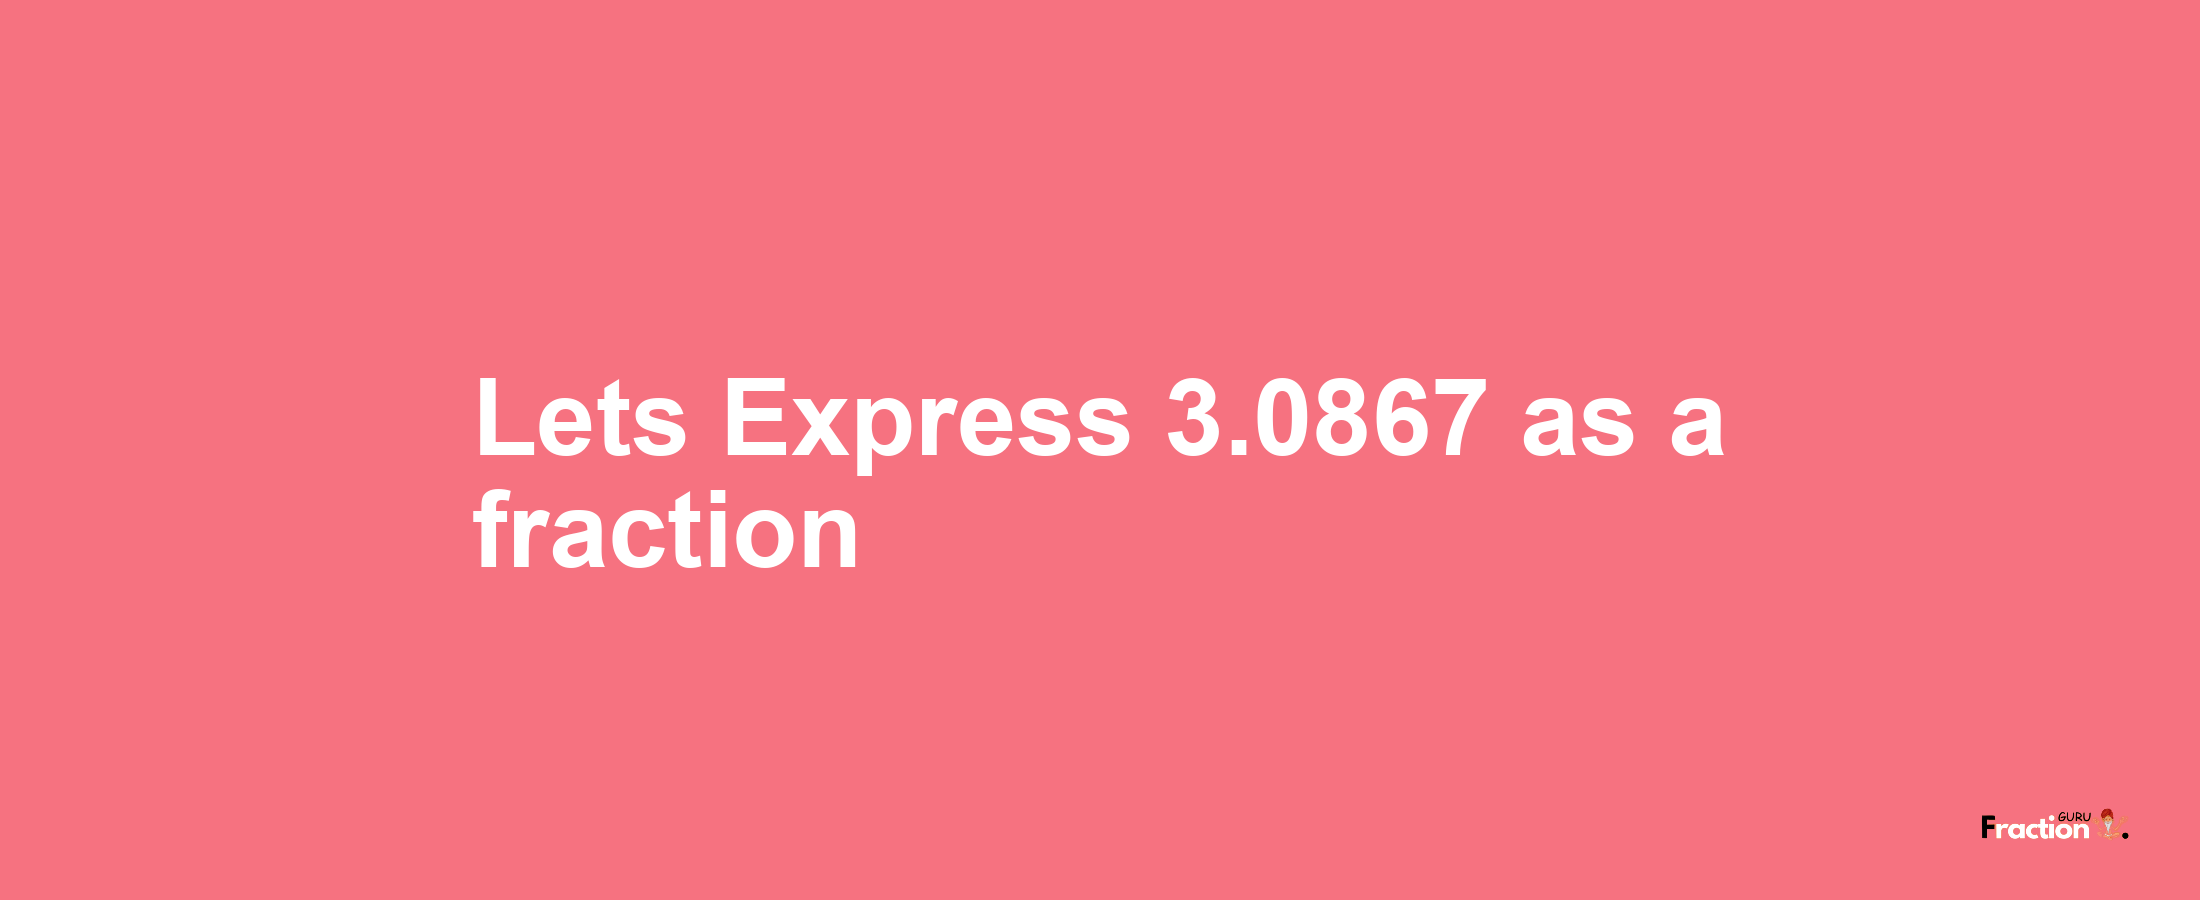 Lets Express 3.0867 as afraction